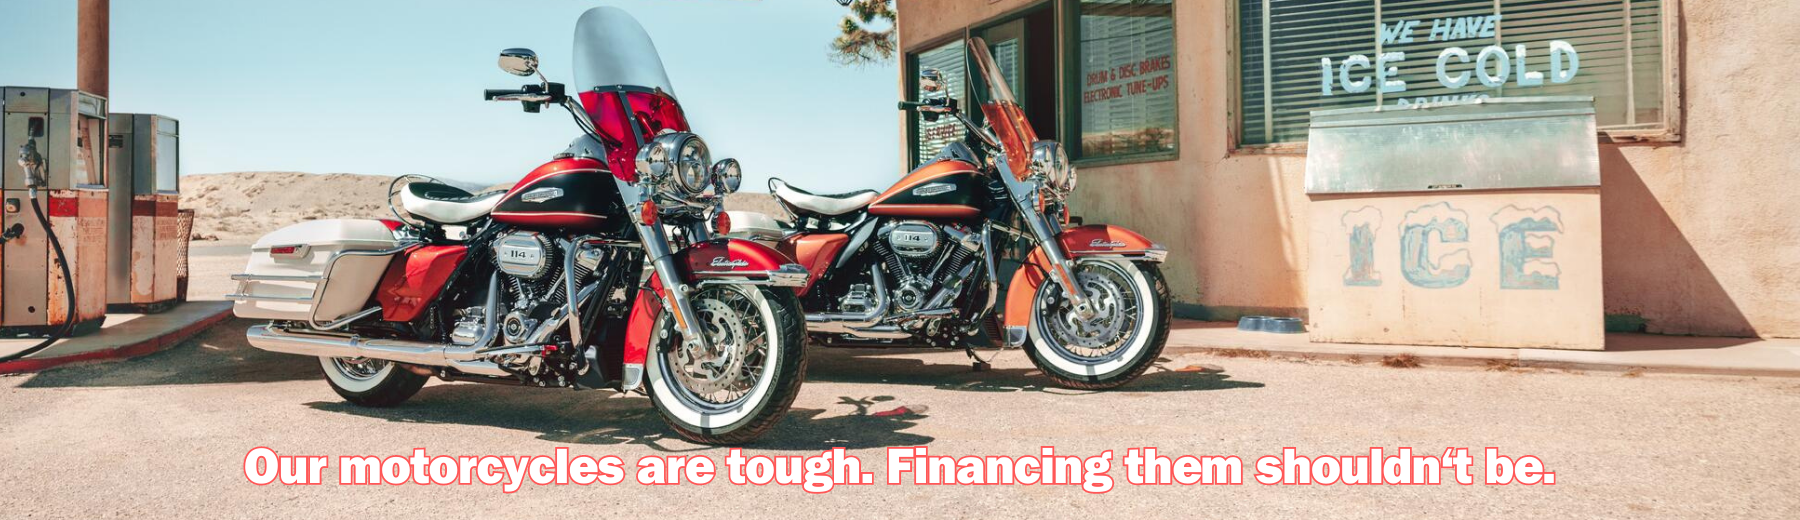 2022 Harley-Davidson® Road Glide Street Glide Riding for sale in Trev Deeley Motorcycles, Vancouver, British Columbia